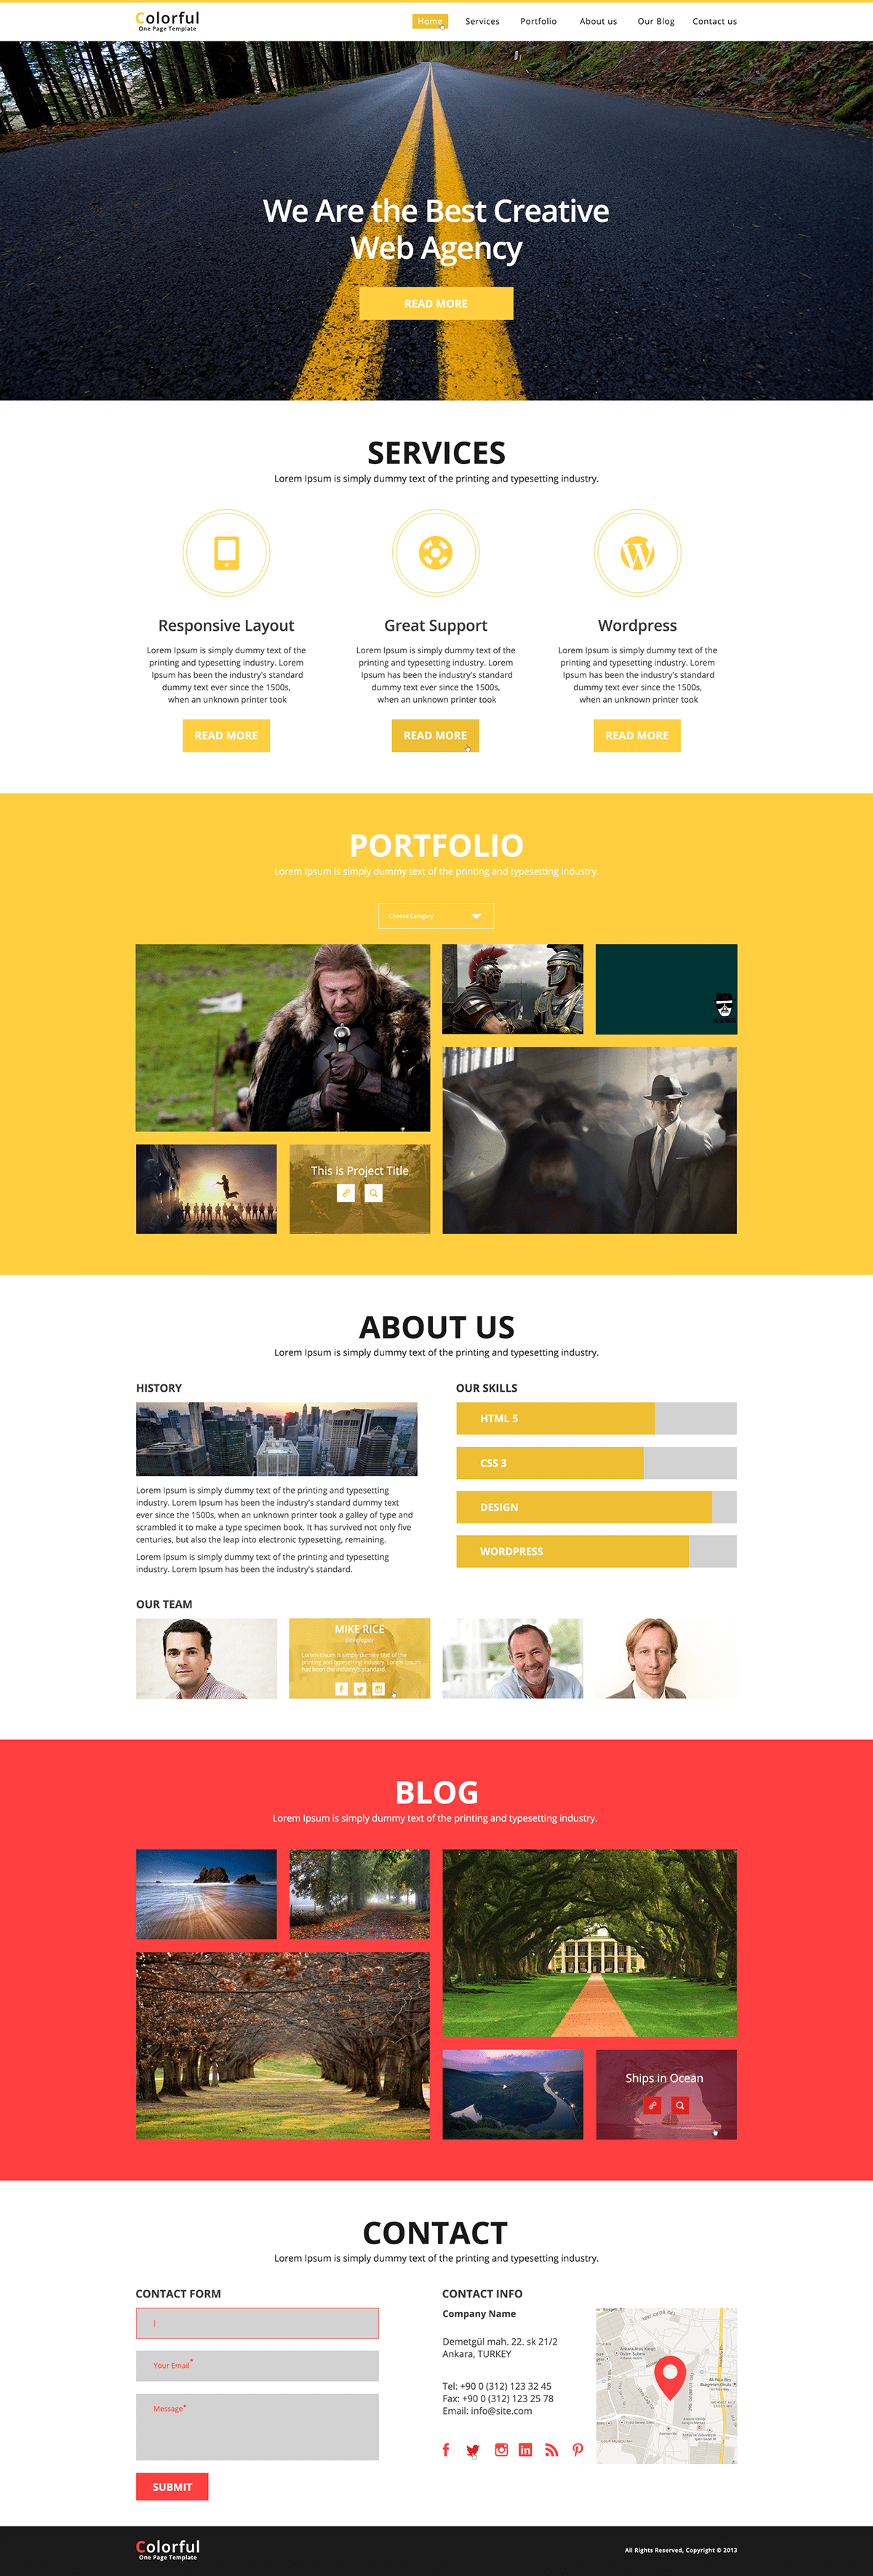 One Page one psd psd business psd Web PSD colorful red yellow White business corporate